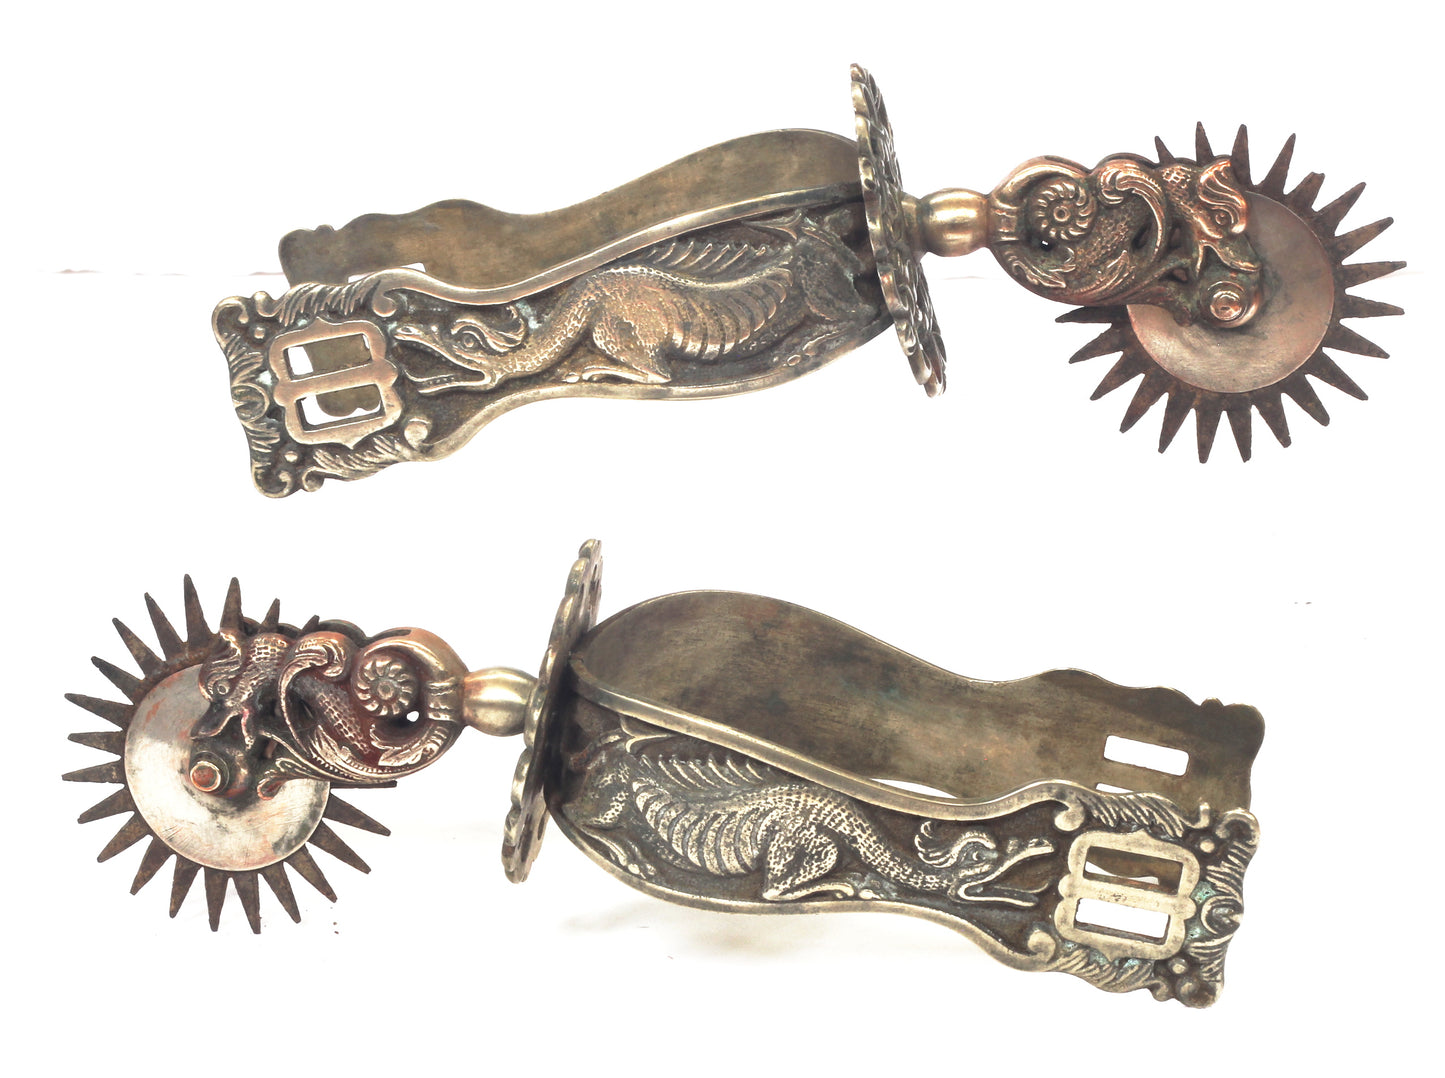 Pair of Gaucho Spurs Decorated with Dragons